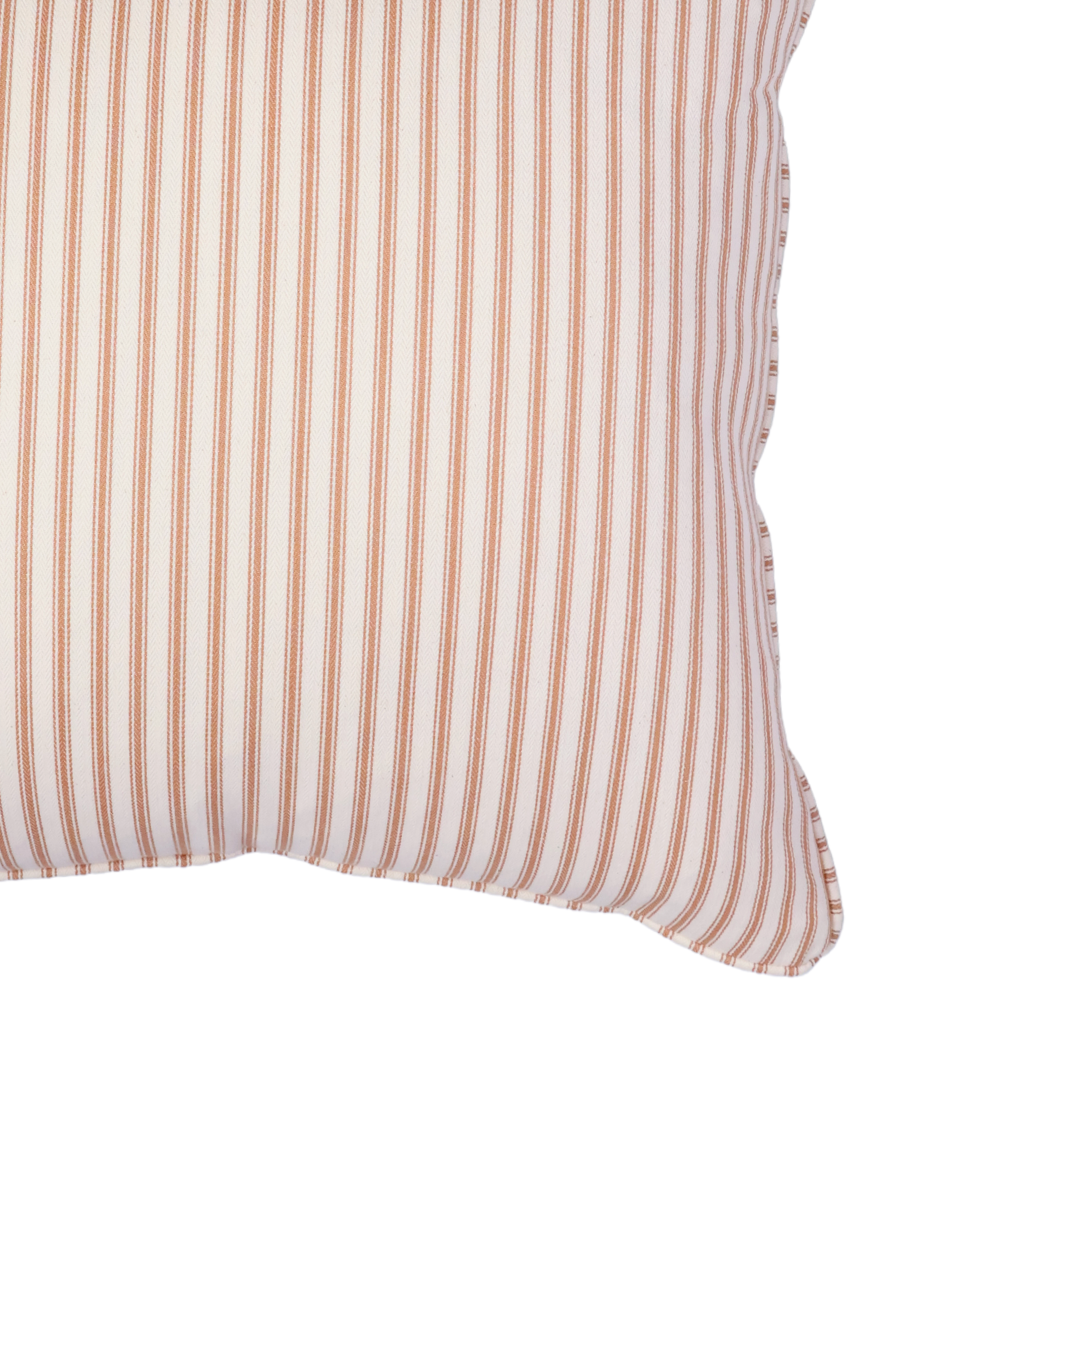 Gold and Natural stripe cushion